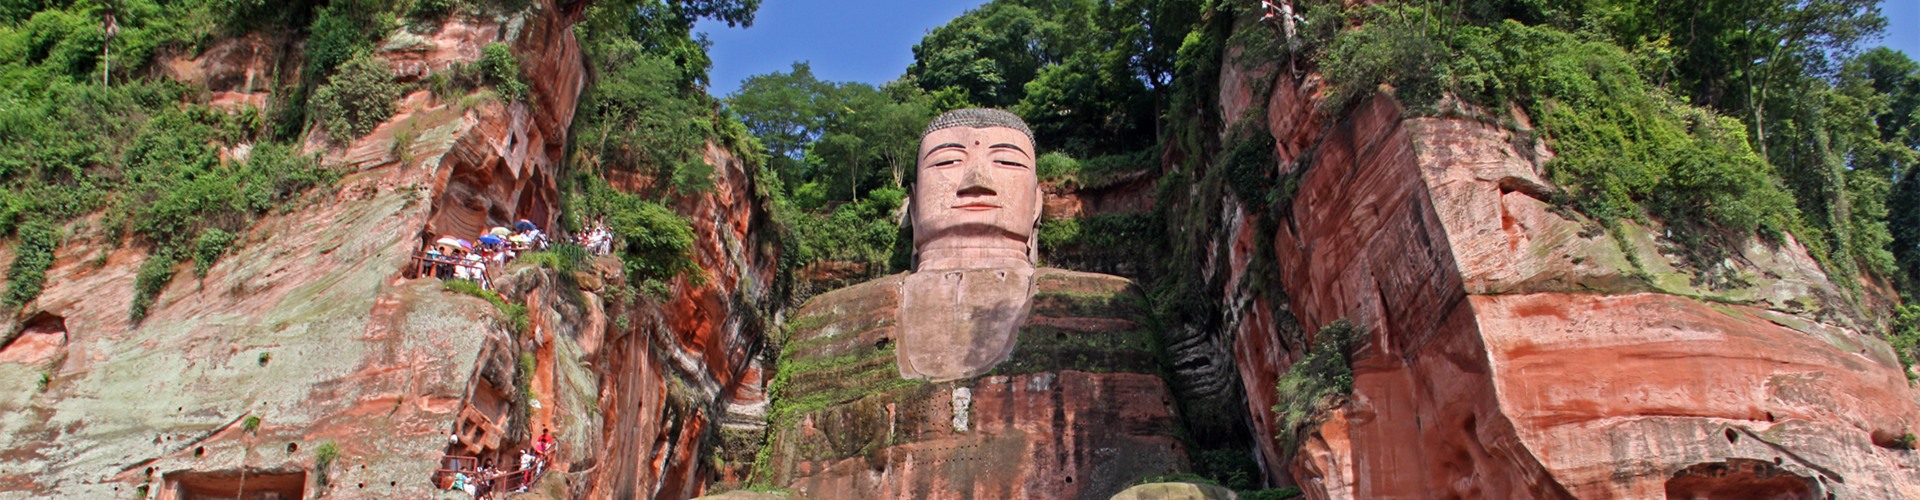 The Leshan Giant Buddha | Fun Facts and History - Trippest's Chengdu Travel Guide